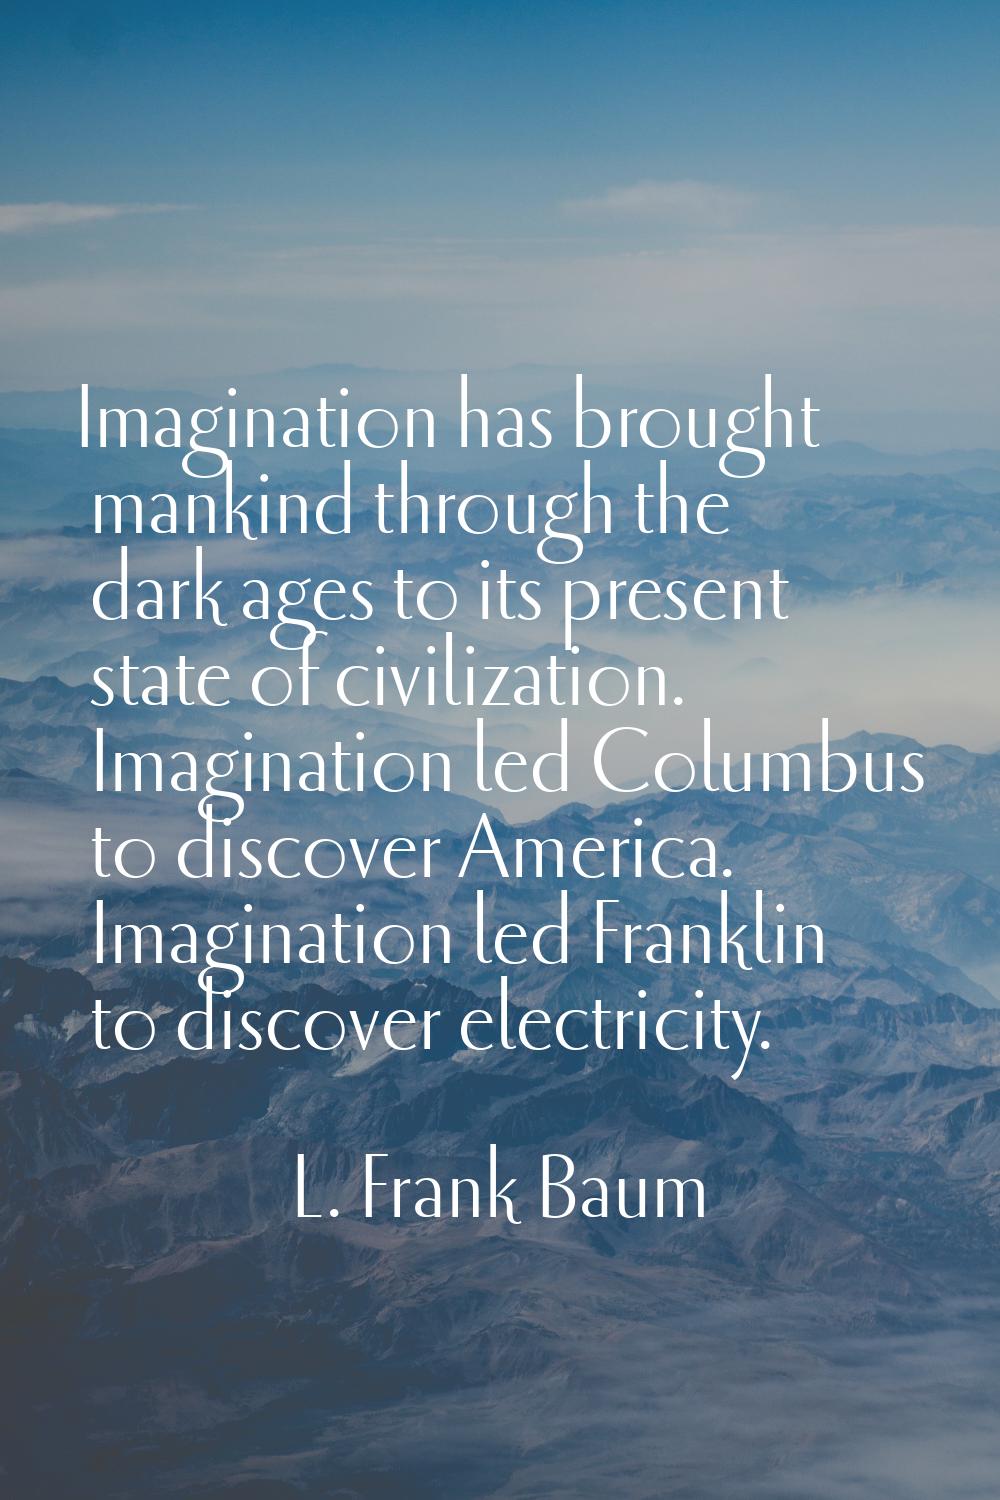 Imagination has brought mankind through the dark ages to its present state of civilization. Imagina